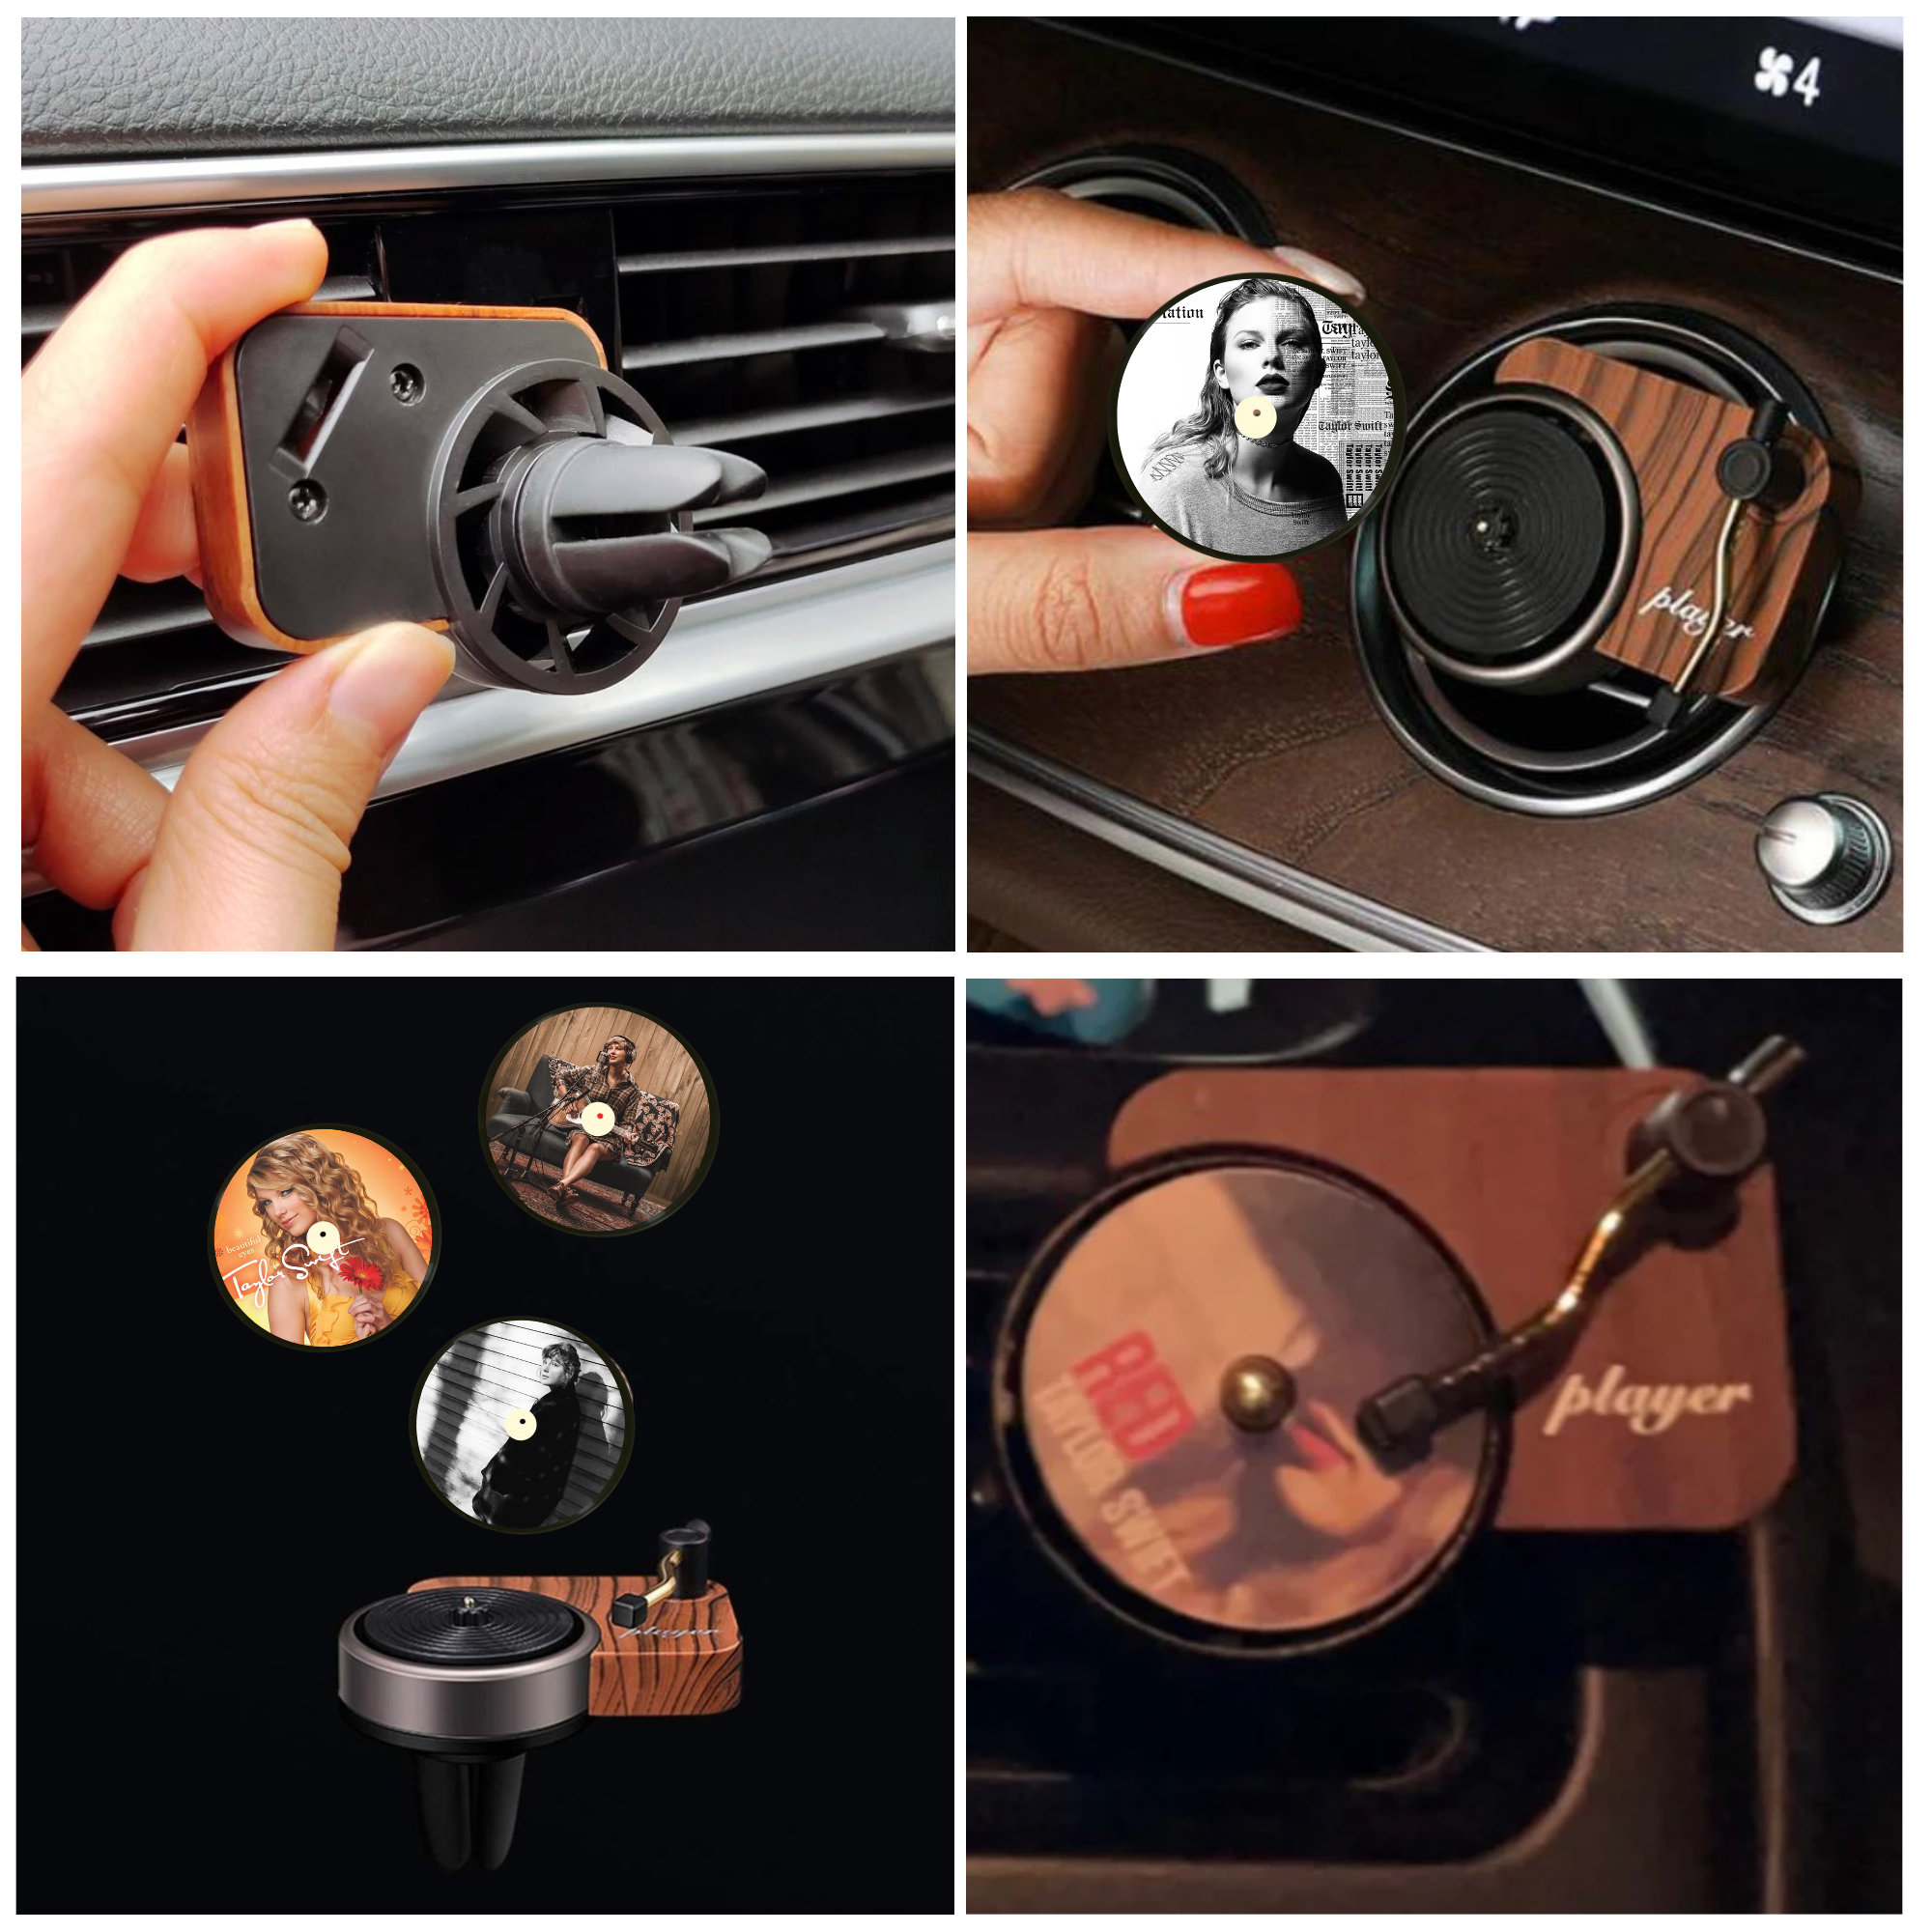 15PCS Taylor Car Air Fresheners Car Record Player, All Taylor Album Cover  Record Player Car Fresheners, Car Accessories For Singer Tylor Music Fans